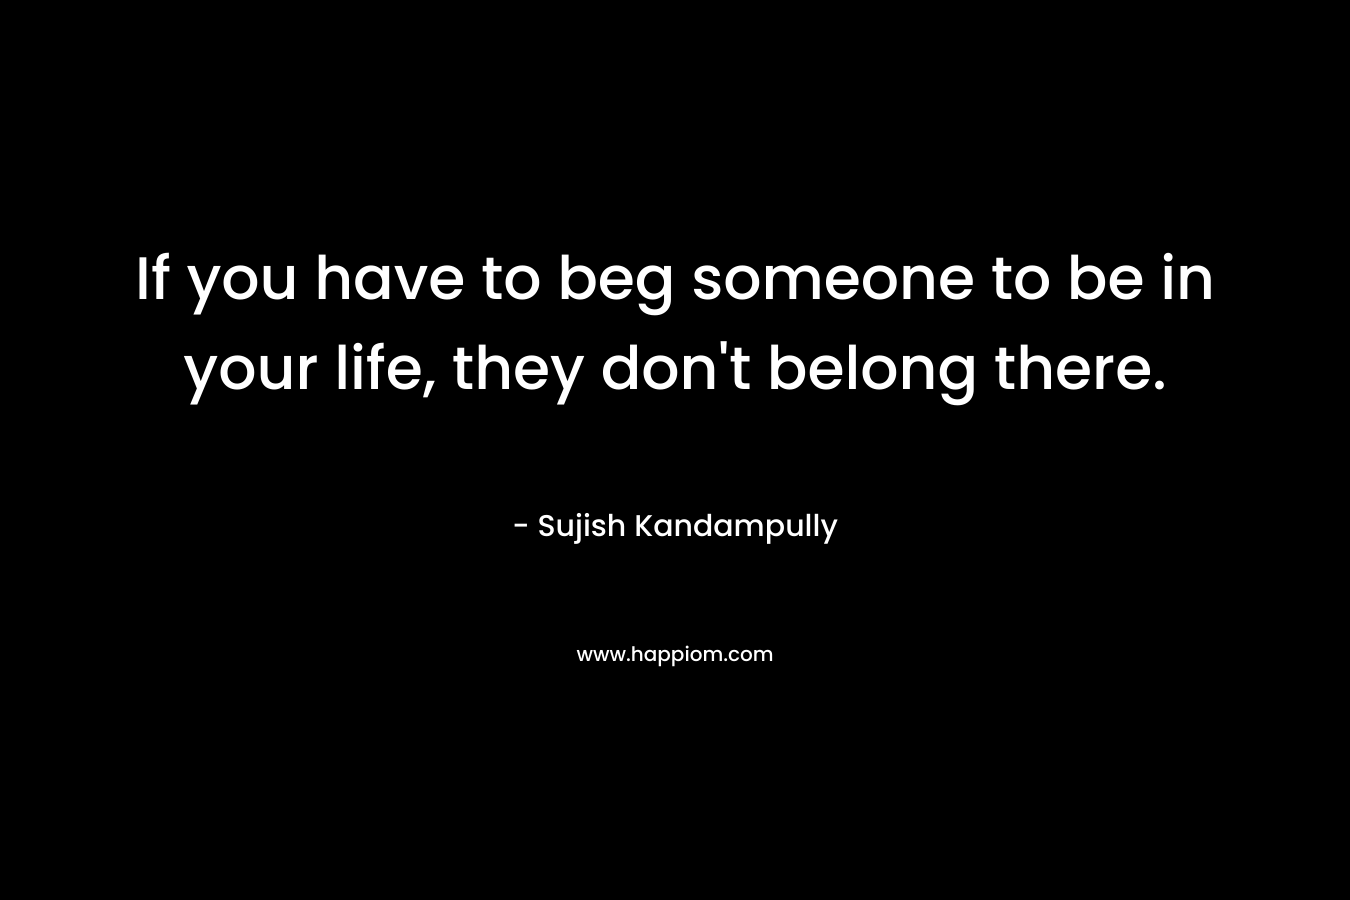 If you have to beg someone to be in your life, they don’t belong there. – Sujish Kandampully